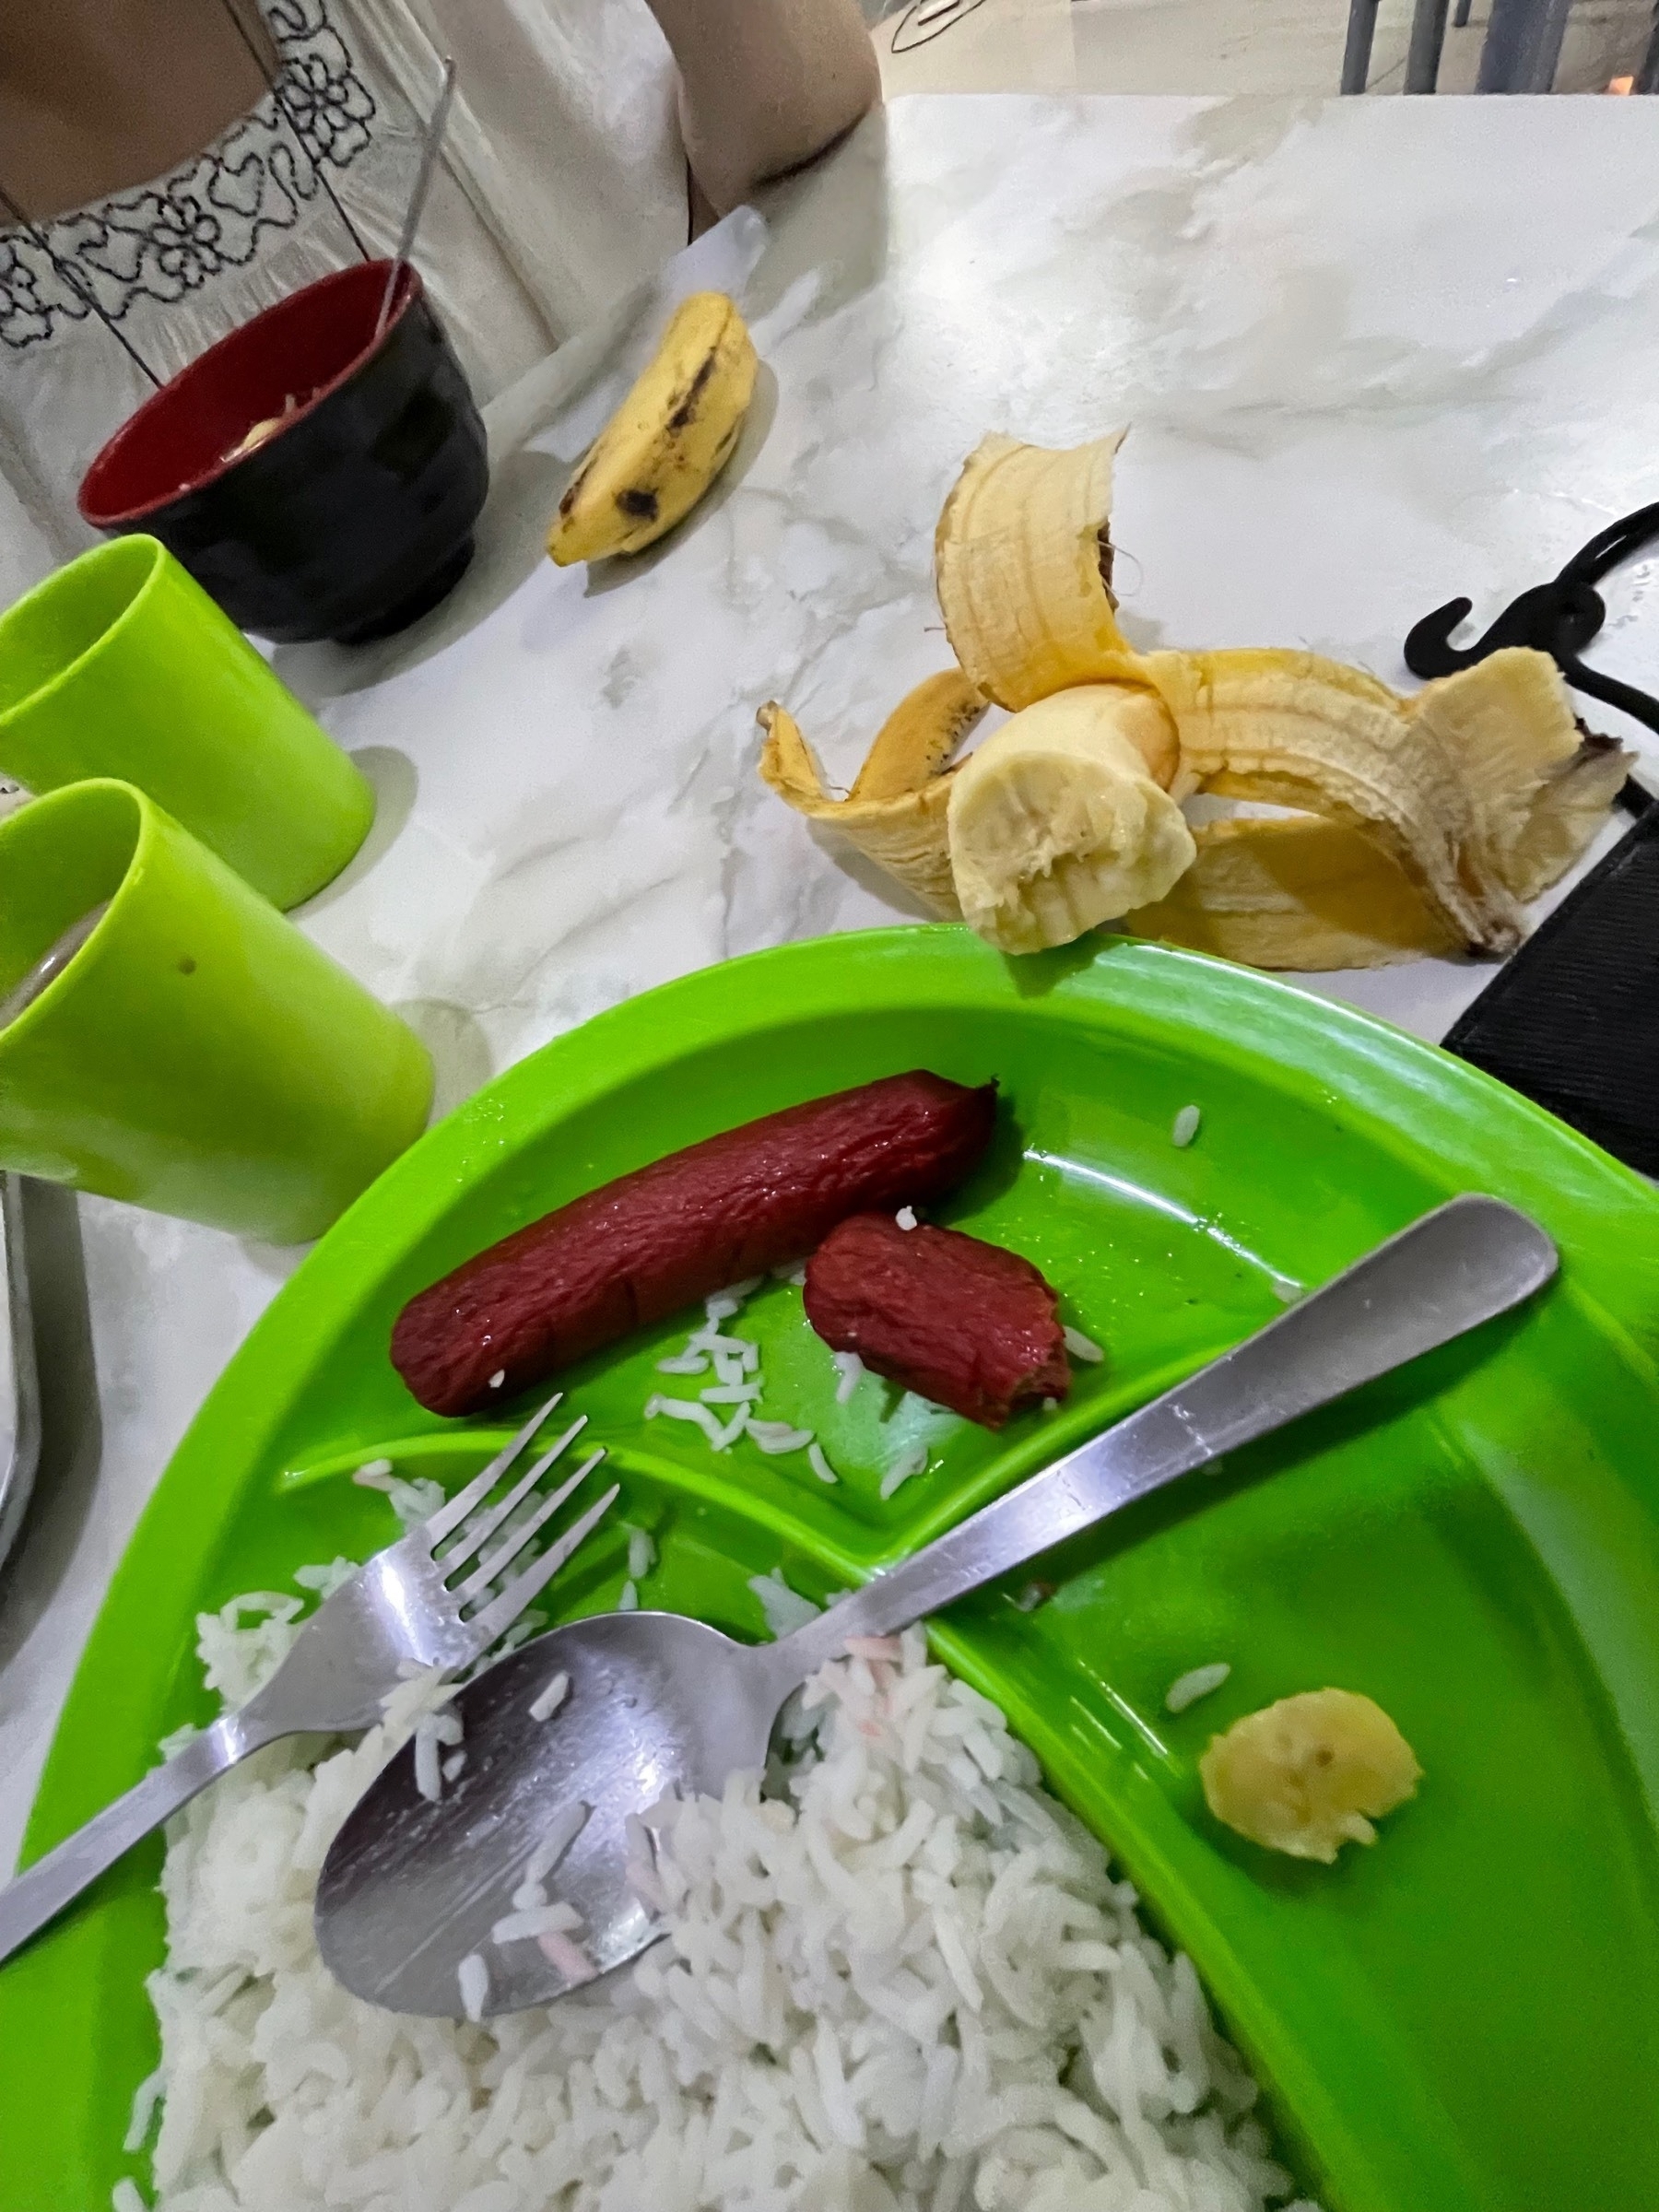 A green plate with rice, one hotdog, and a bitten-off banana are in view. Two green cups are also to the side, because Chi is eating breakfast with her mom.